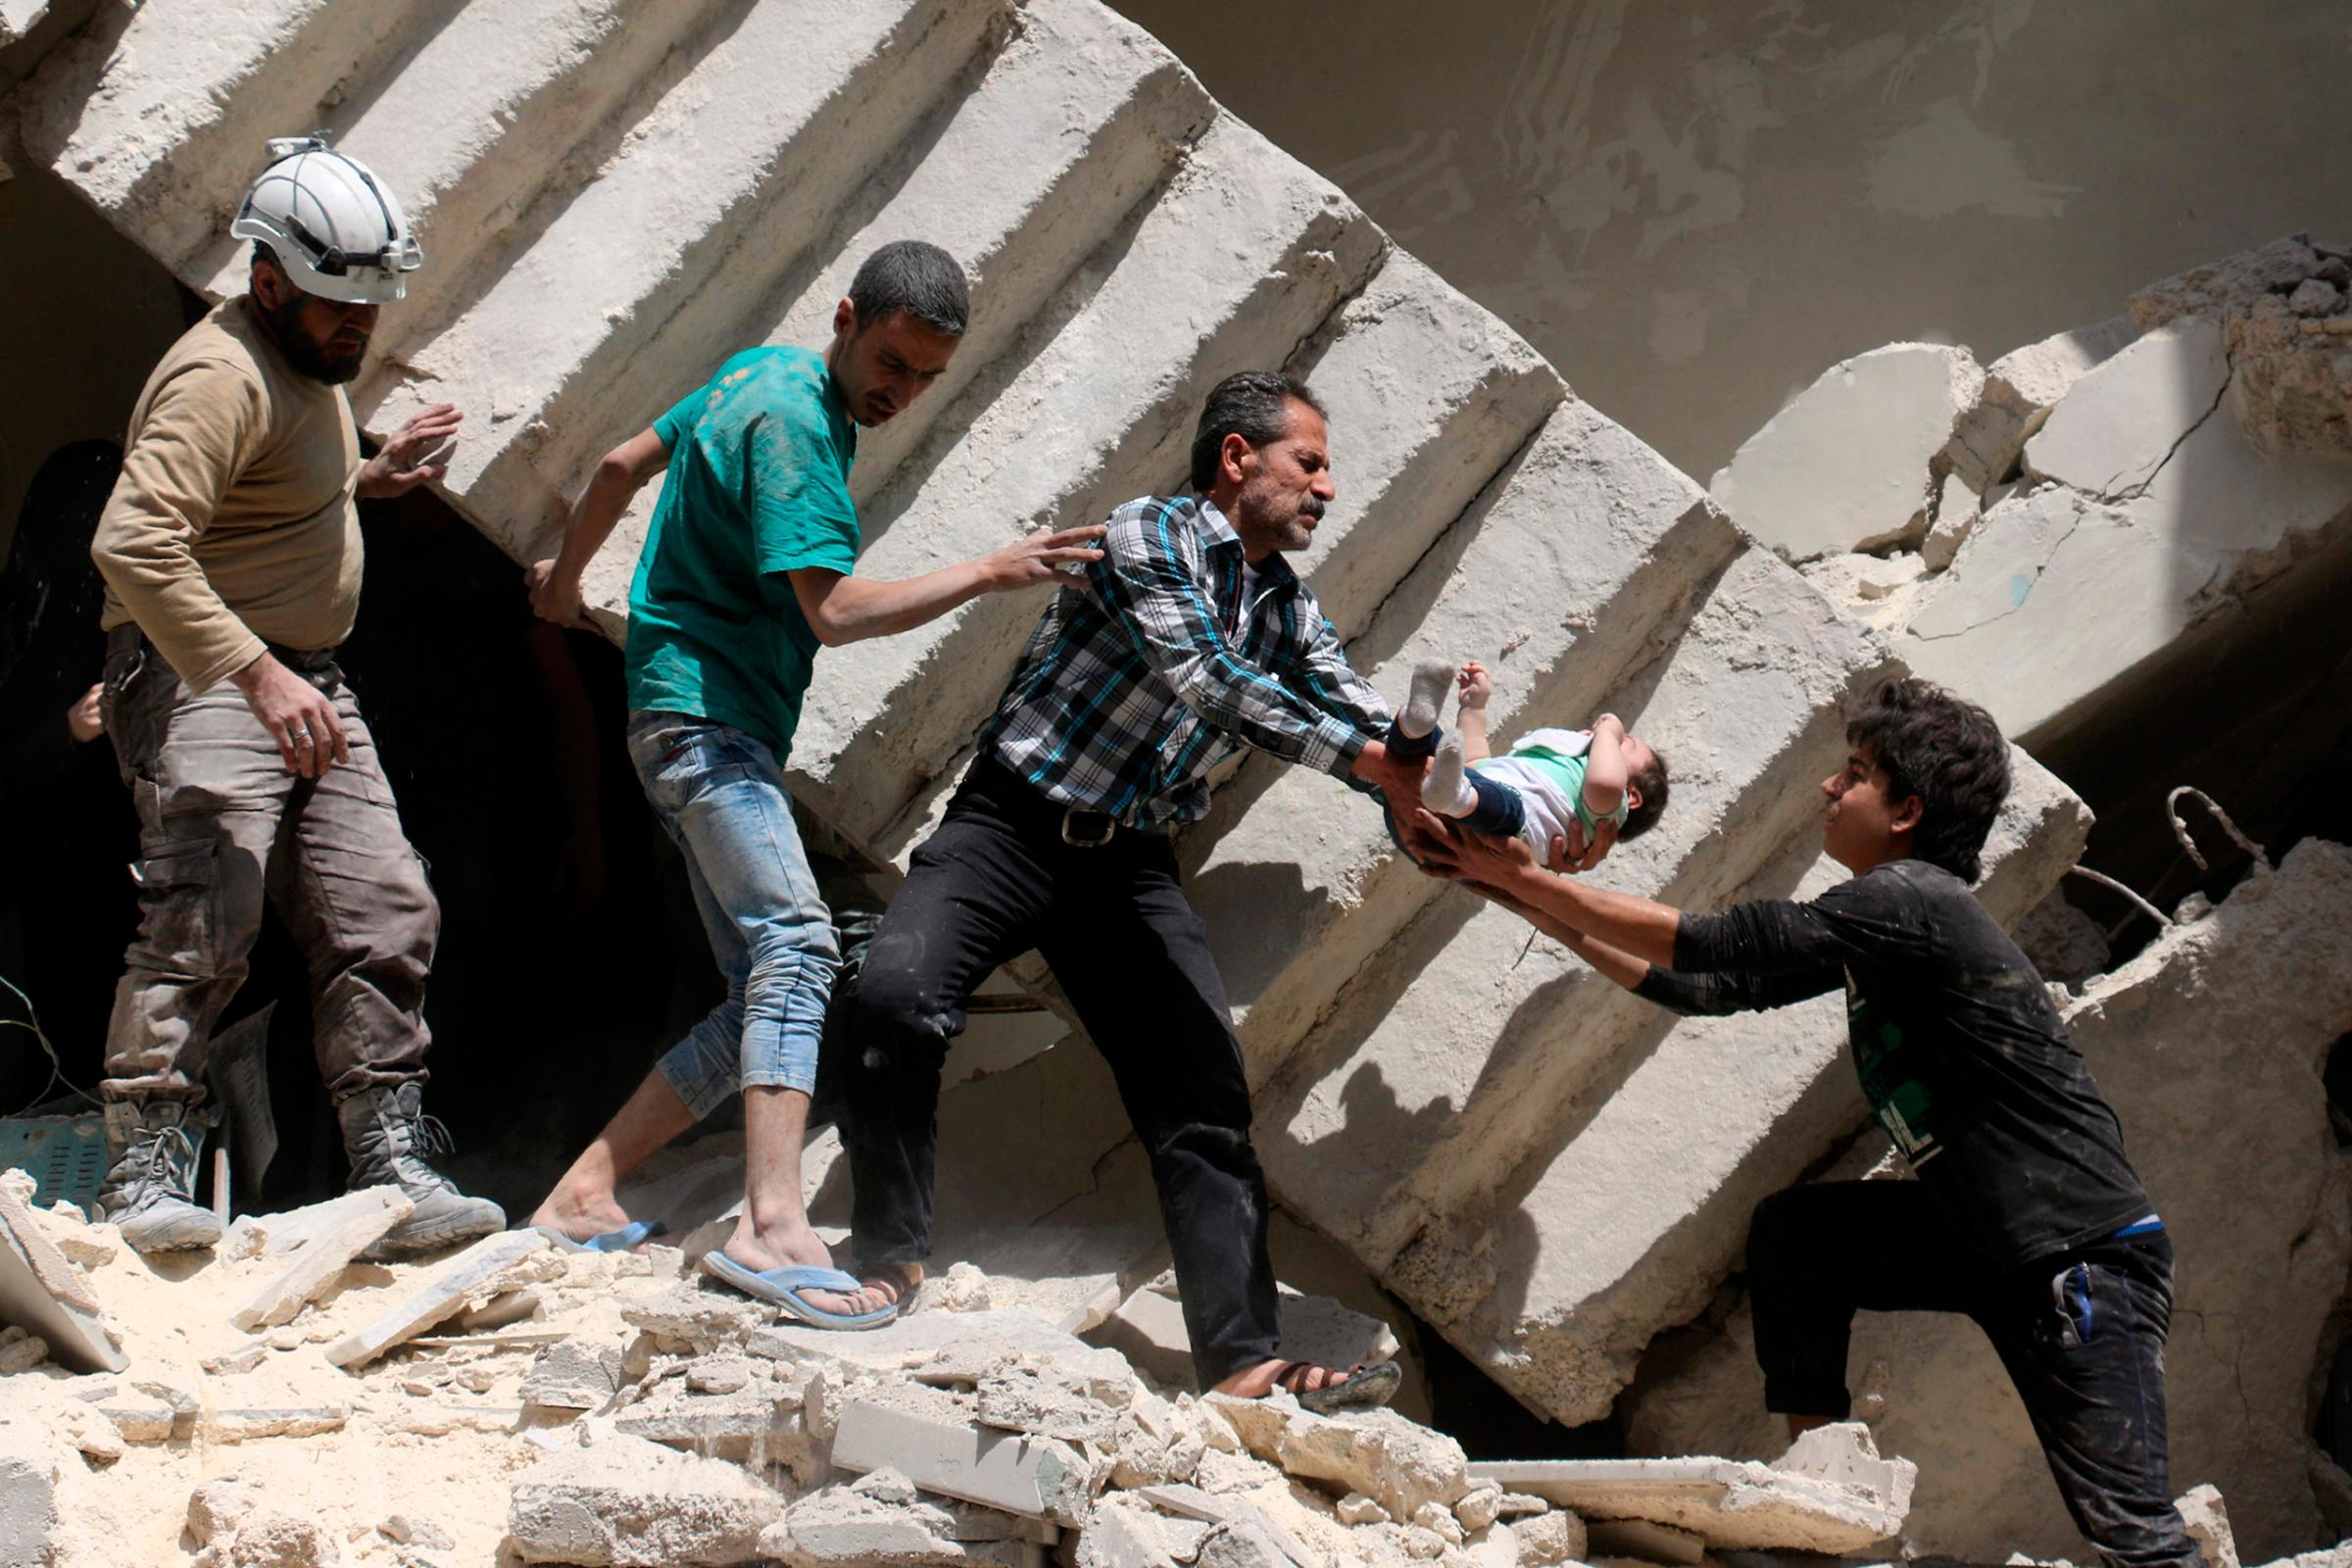 Men pass a toddler between each other during an evacuation from a destroyed building following a reported airstrike on a rebel-held neighborhood in Aleppo, Syria, April 28, 2016.